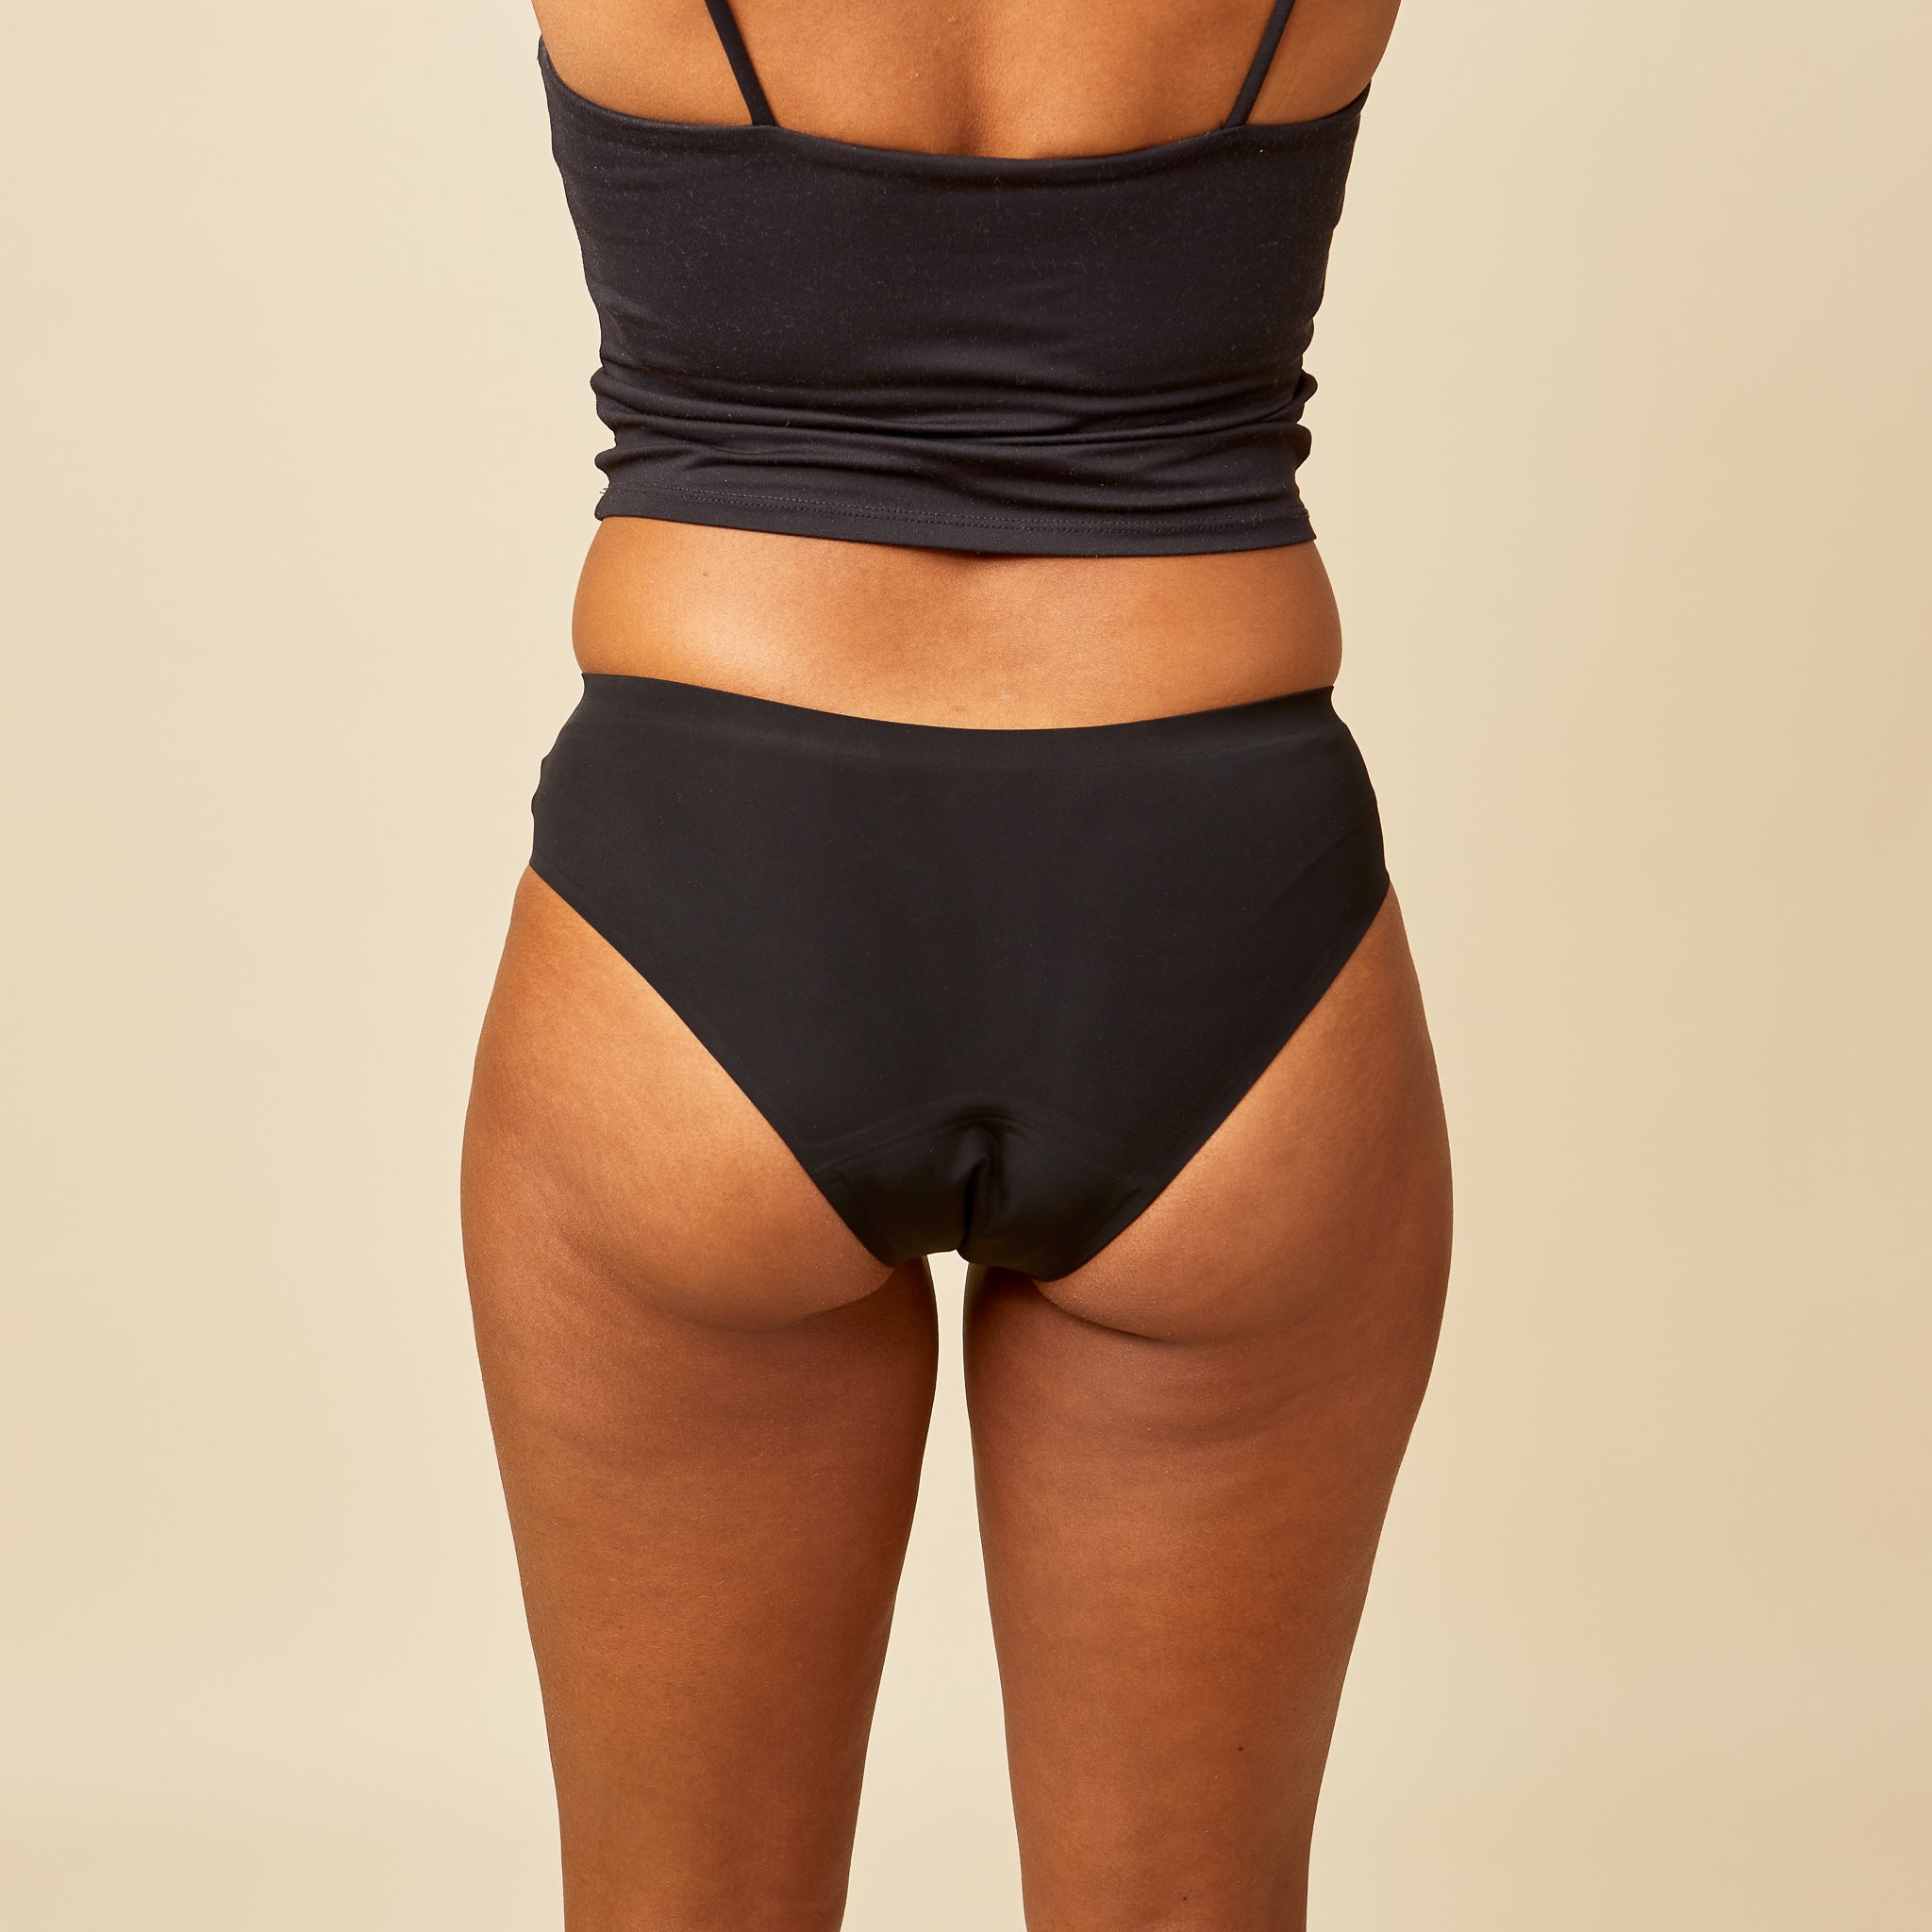 Cheeky Period Underwear made of nylon shown worn by a model from the back showing the seamless and cheeky cut.